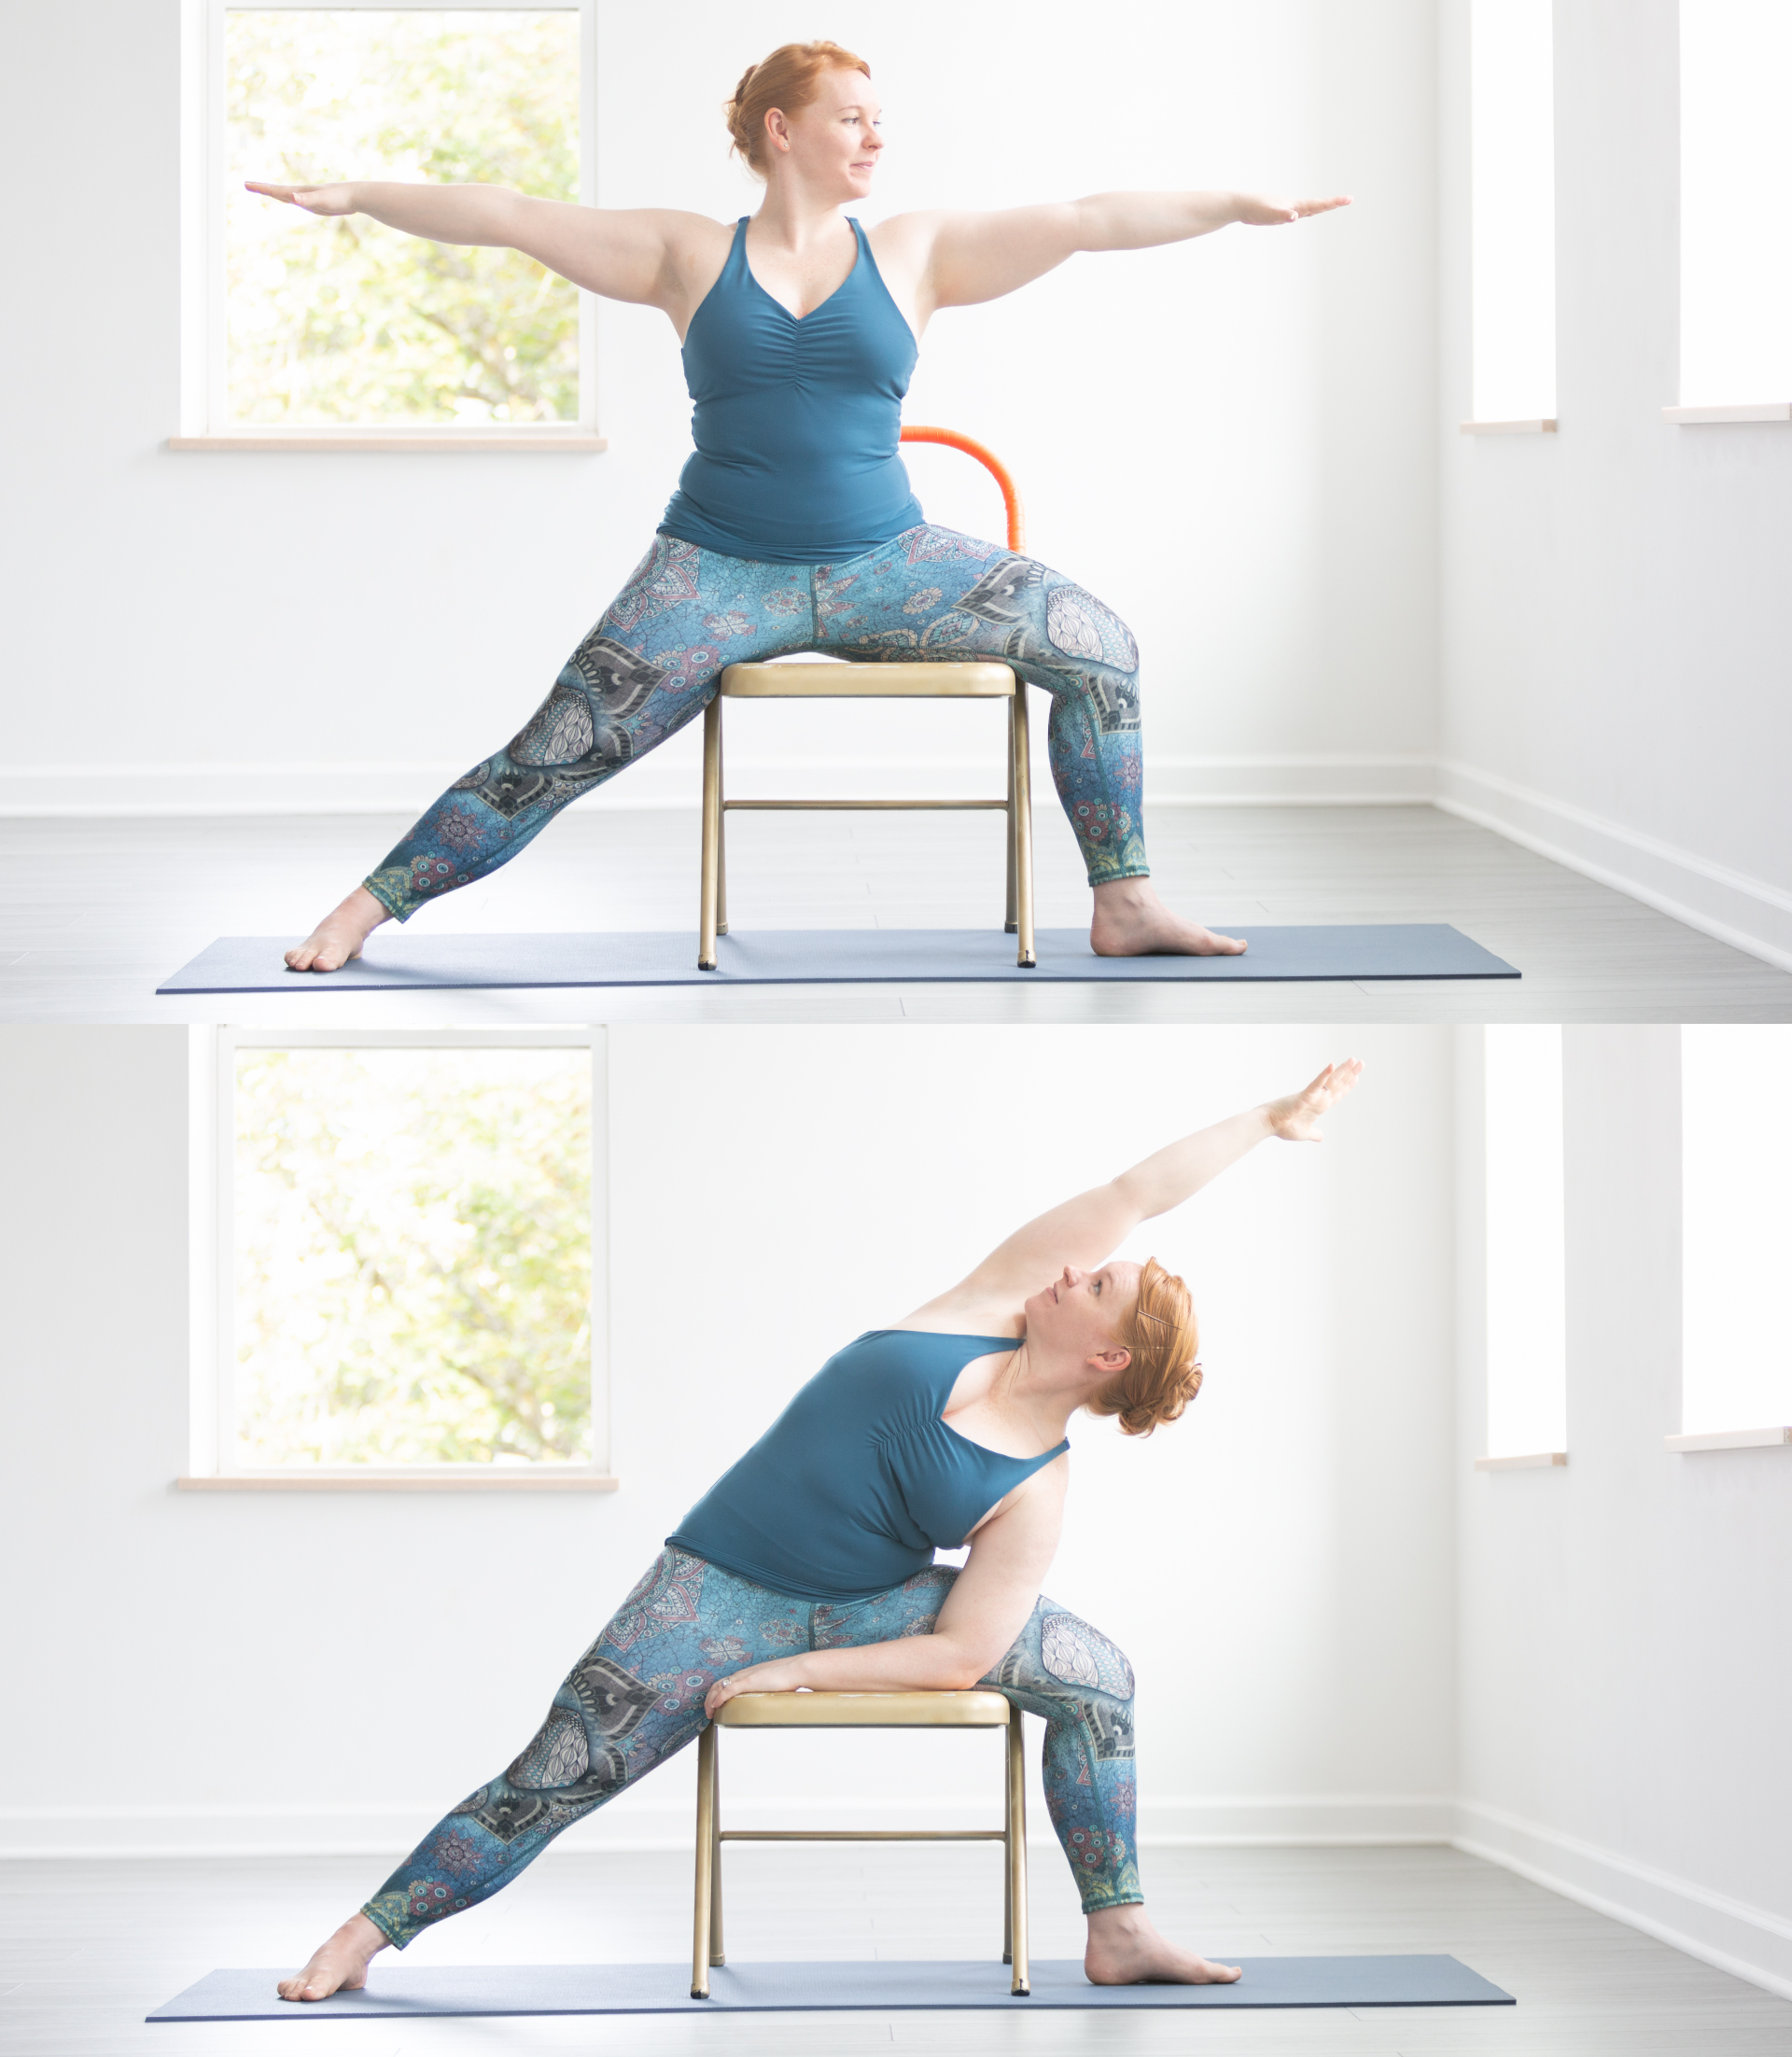 7 Chair Yoga Stretches: Gentle Seated Postures To Try At Home |  mindbodygreen